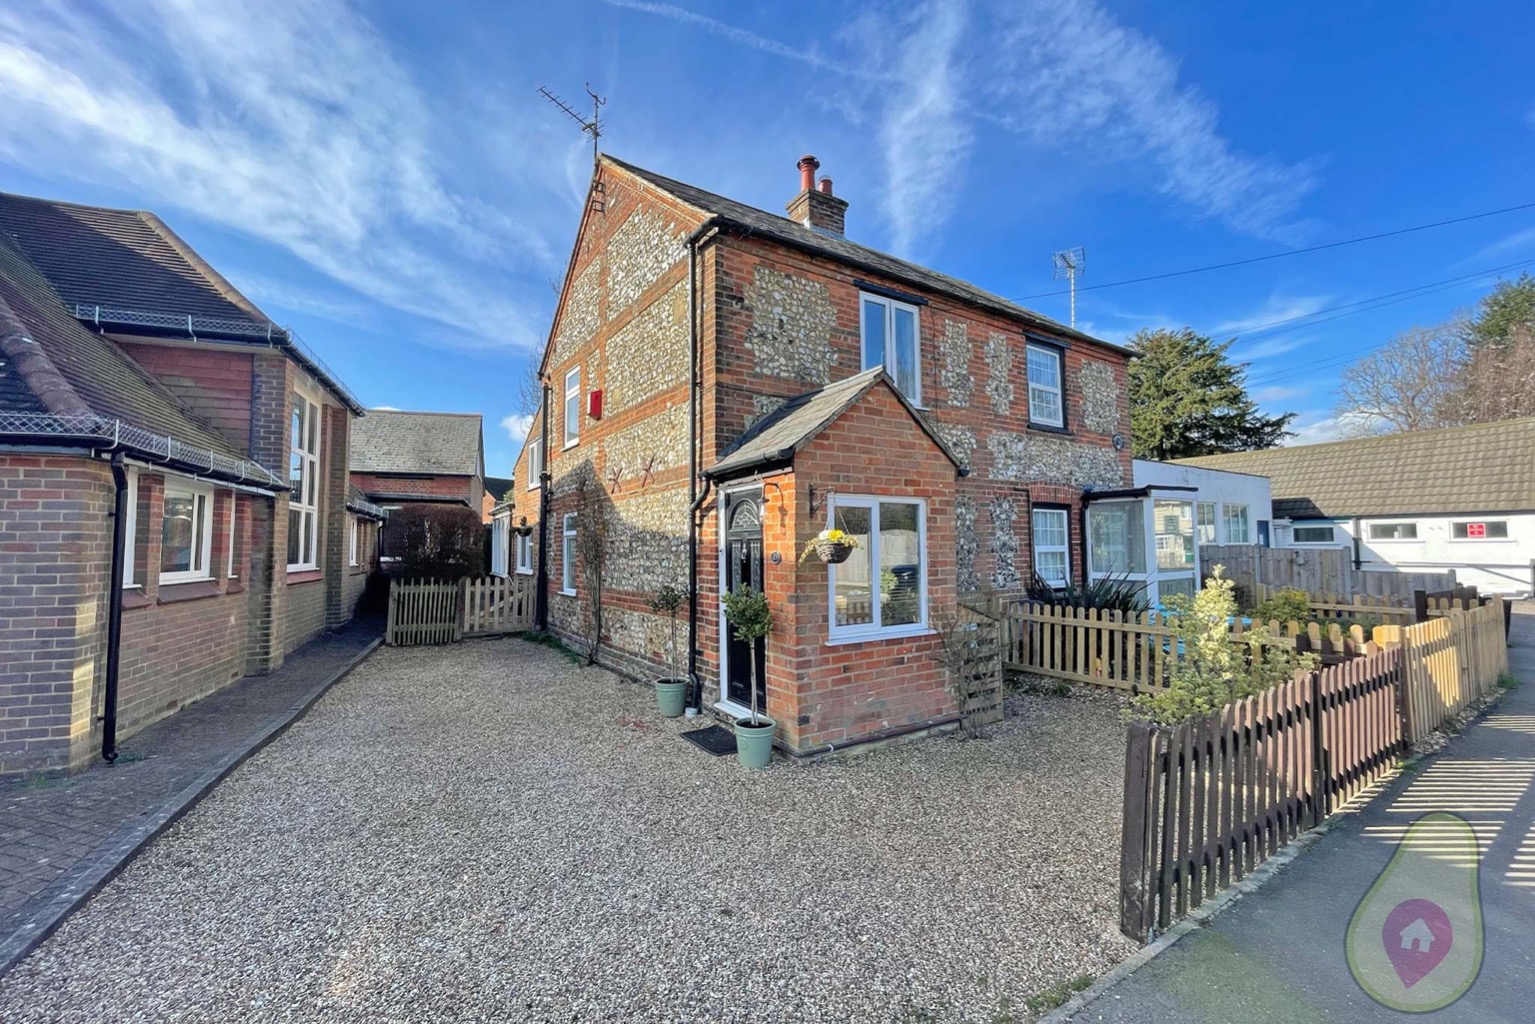 **CHECK OUT THE PROPERTY VIDEO** A three bedroom, semi detached brick and flint cottage that was originally built in 1850. Well presented throughout with exposed beams, open fireplace and driveway parking. A short walk into the village itself and a ten minute drive to Amersham.